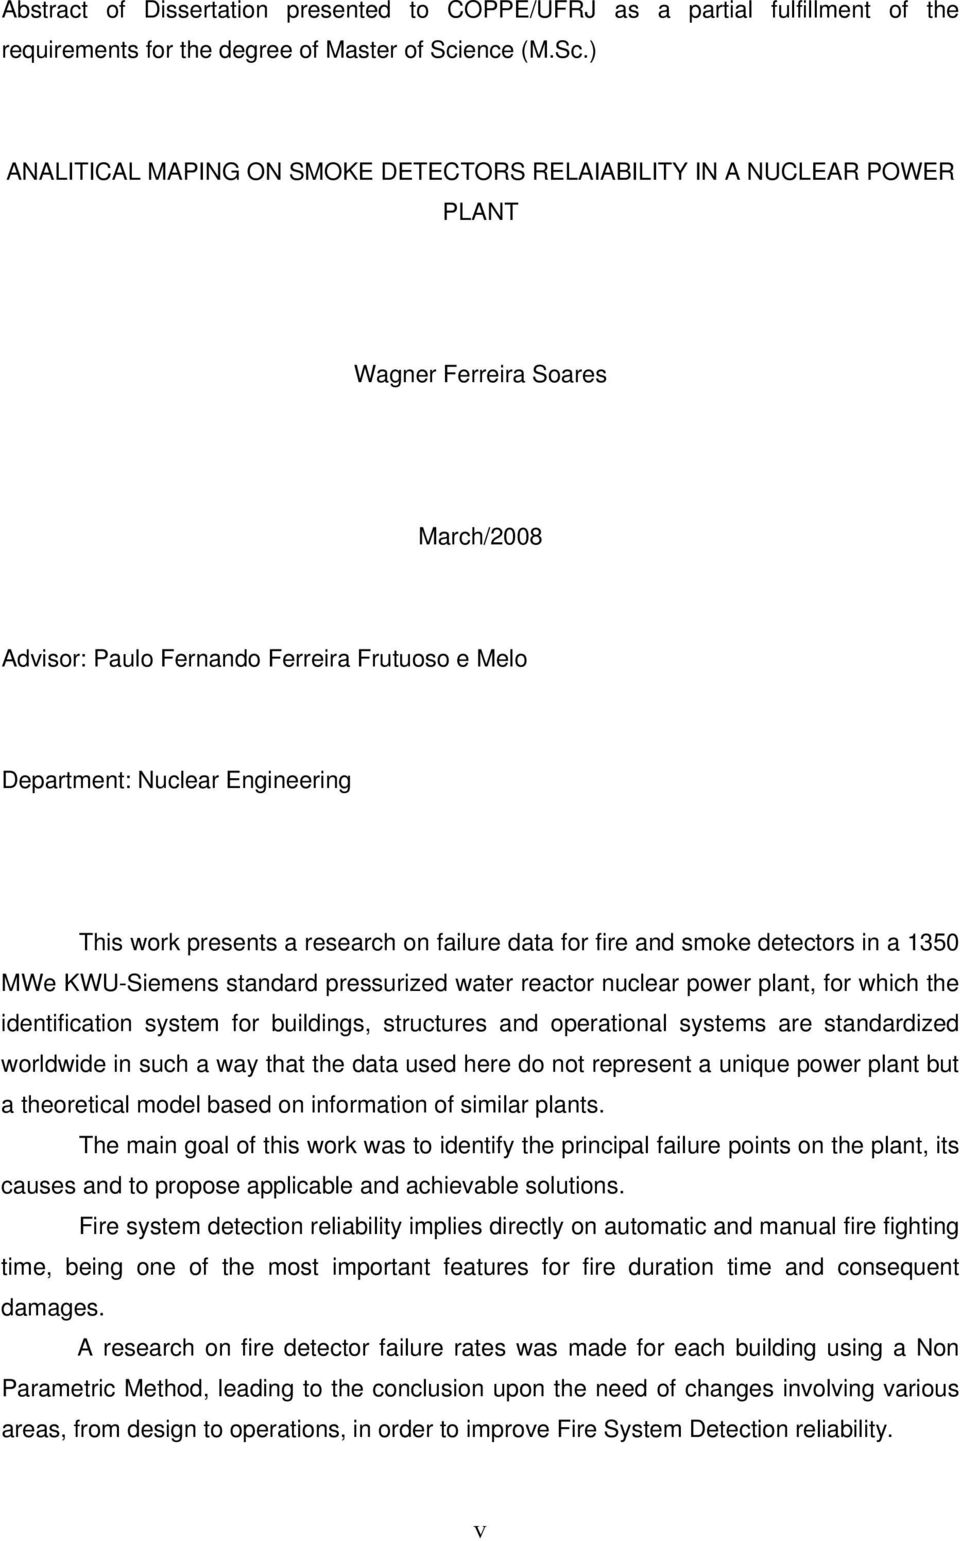 ) ANALITICAL MAPING ON SMOKE DETECTORS RELAIABILITY IN A NUCLEAR POWER PLANT Wagner Ferreira Soares March/28 Advisor: Paulo Fernando Ferreira Frutuoso e Melo Department: Nuclear Engineering This work